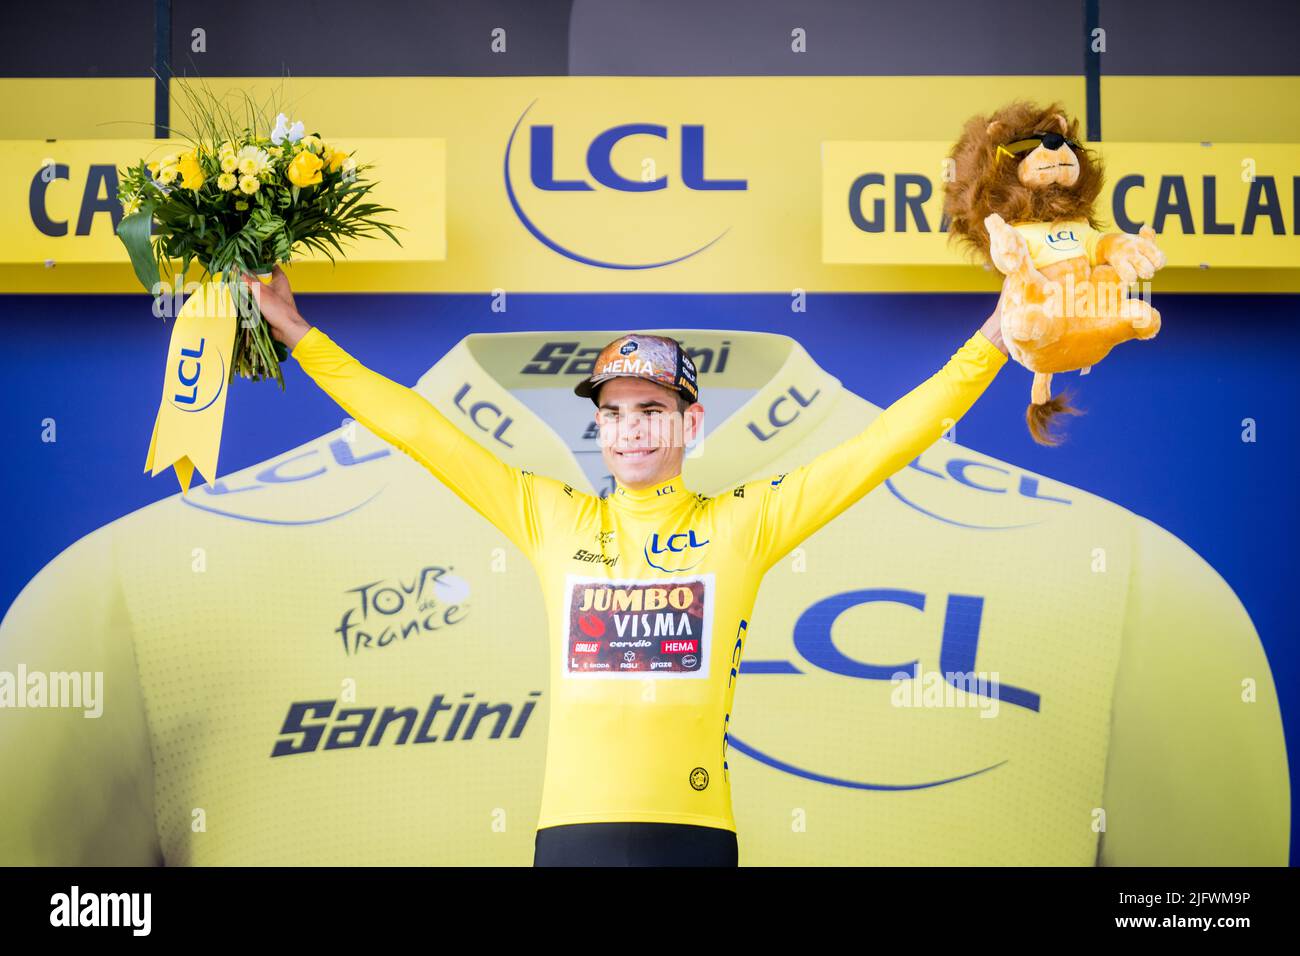 Calais, France,05 July 2022. Belgian Wout Van Aert of Team Jumbo-Visma wearing the yellow jersey pictured at the podium of stage four of the Tour de France cycling race, a 171.5 km race from Dunkerque to Calais, France on Tuesday 05 July 2022. This year's Tour de France takes place from 01 to 24 July 2022. BELGA PHOTO JASPER JACOBS - UK OUT Stock Photo